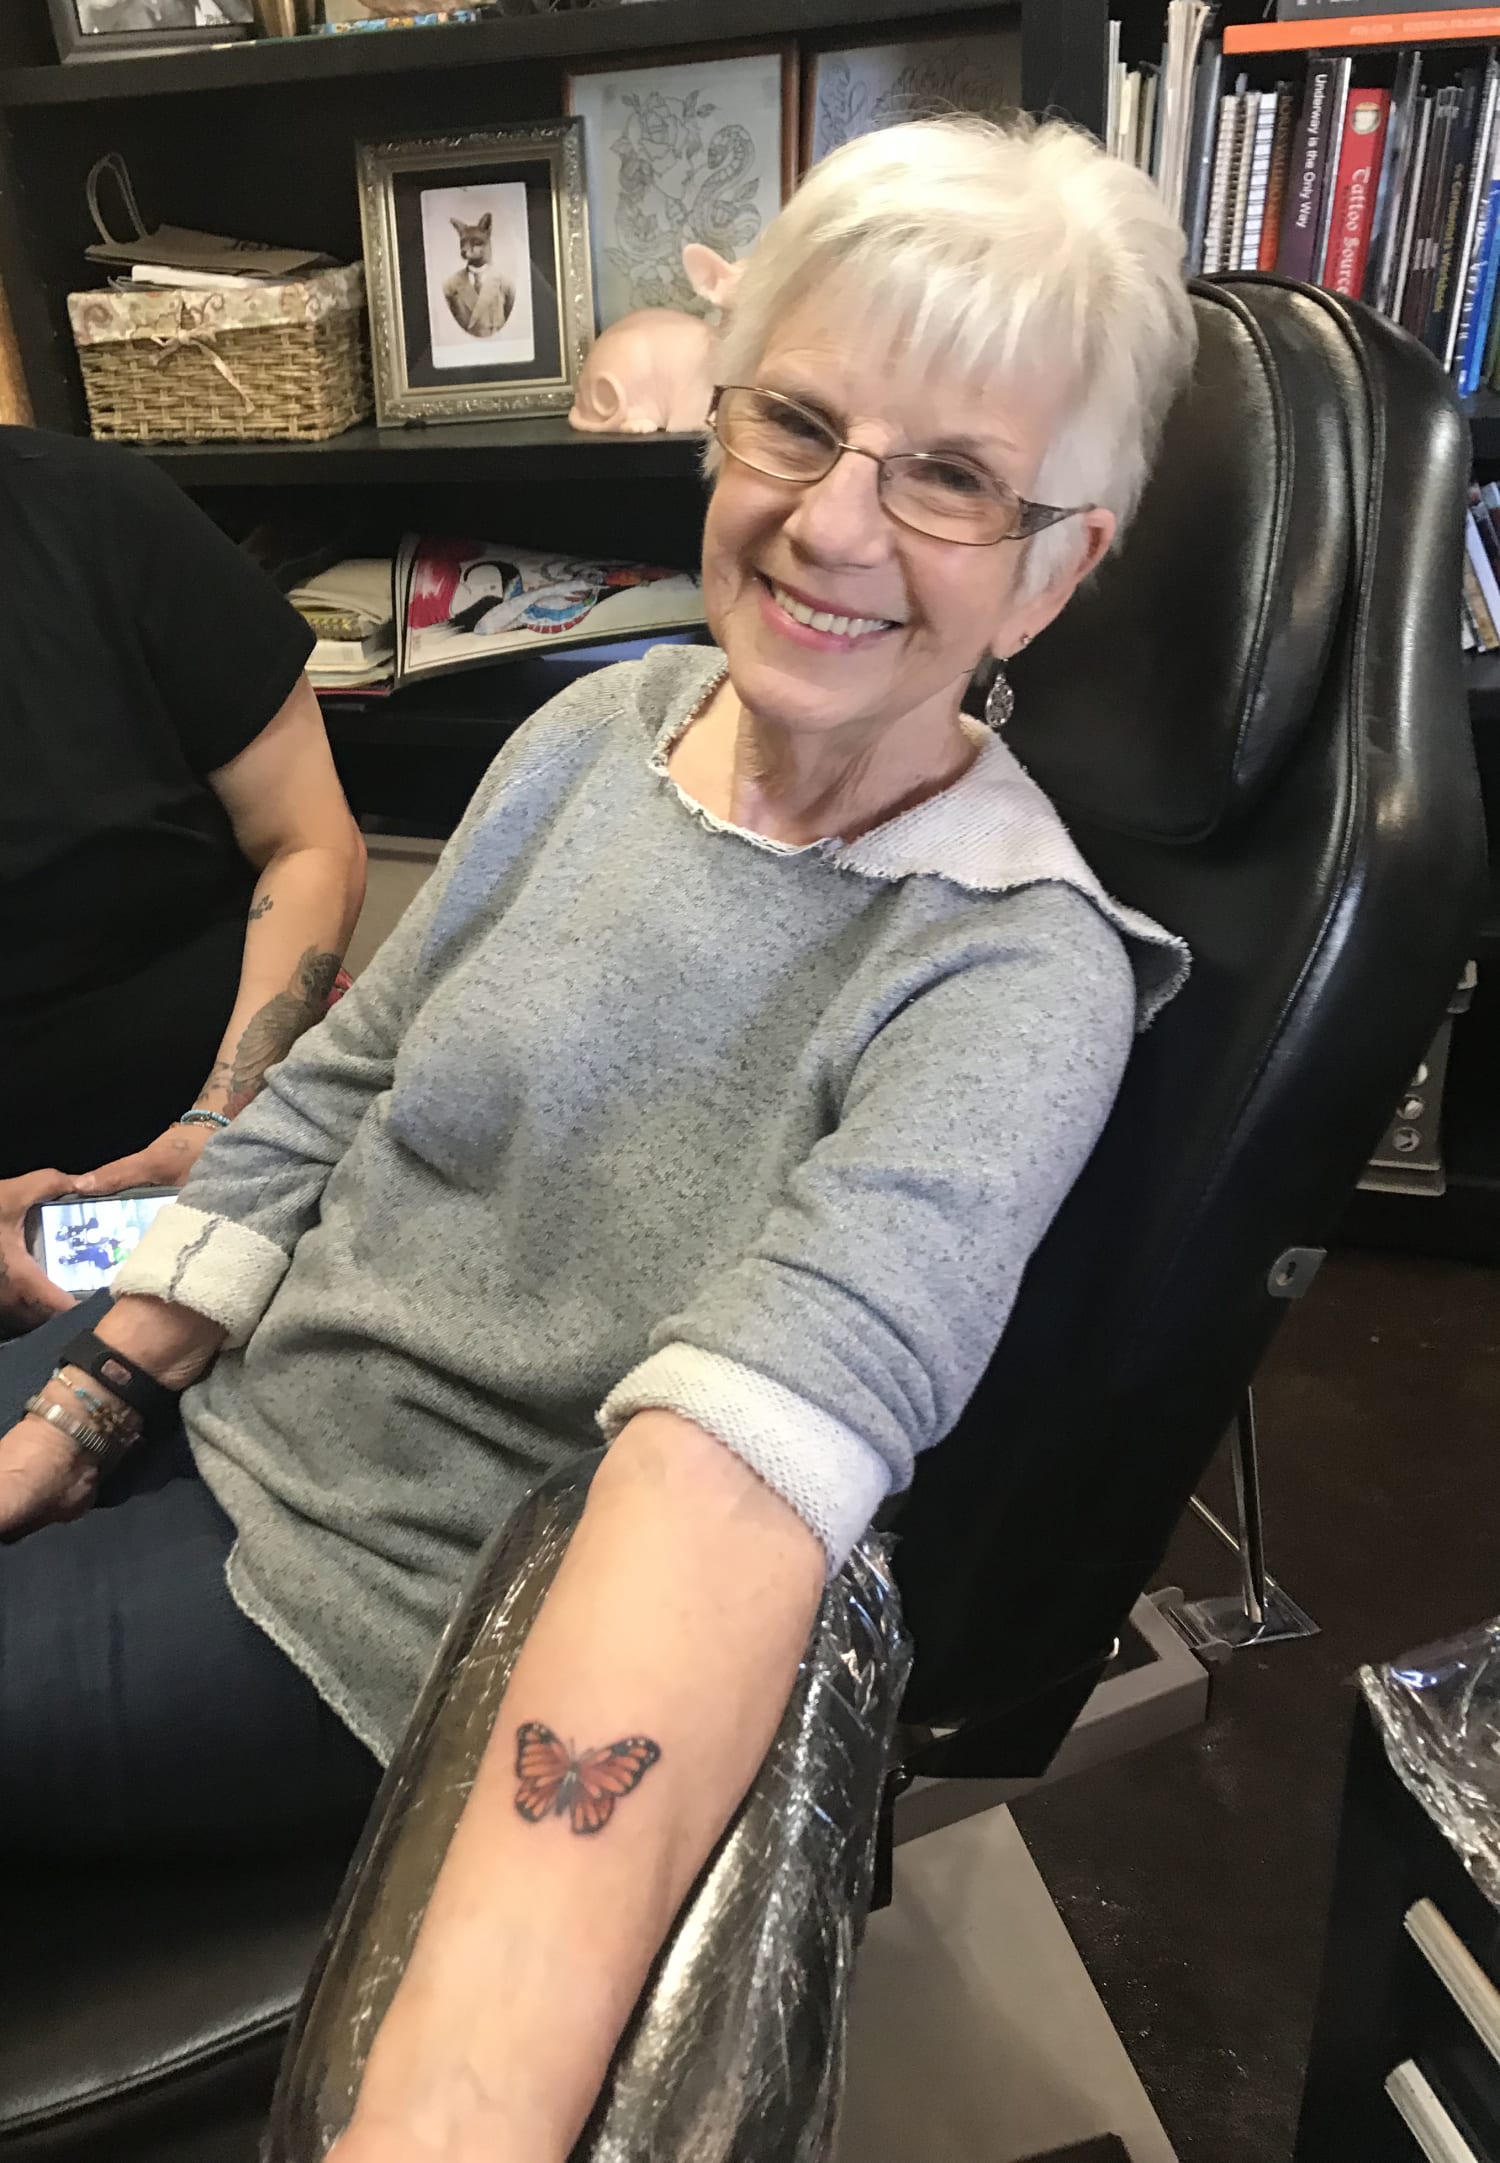 First tattoo over 40: Why these women waited to get inked